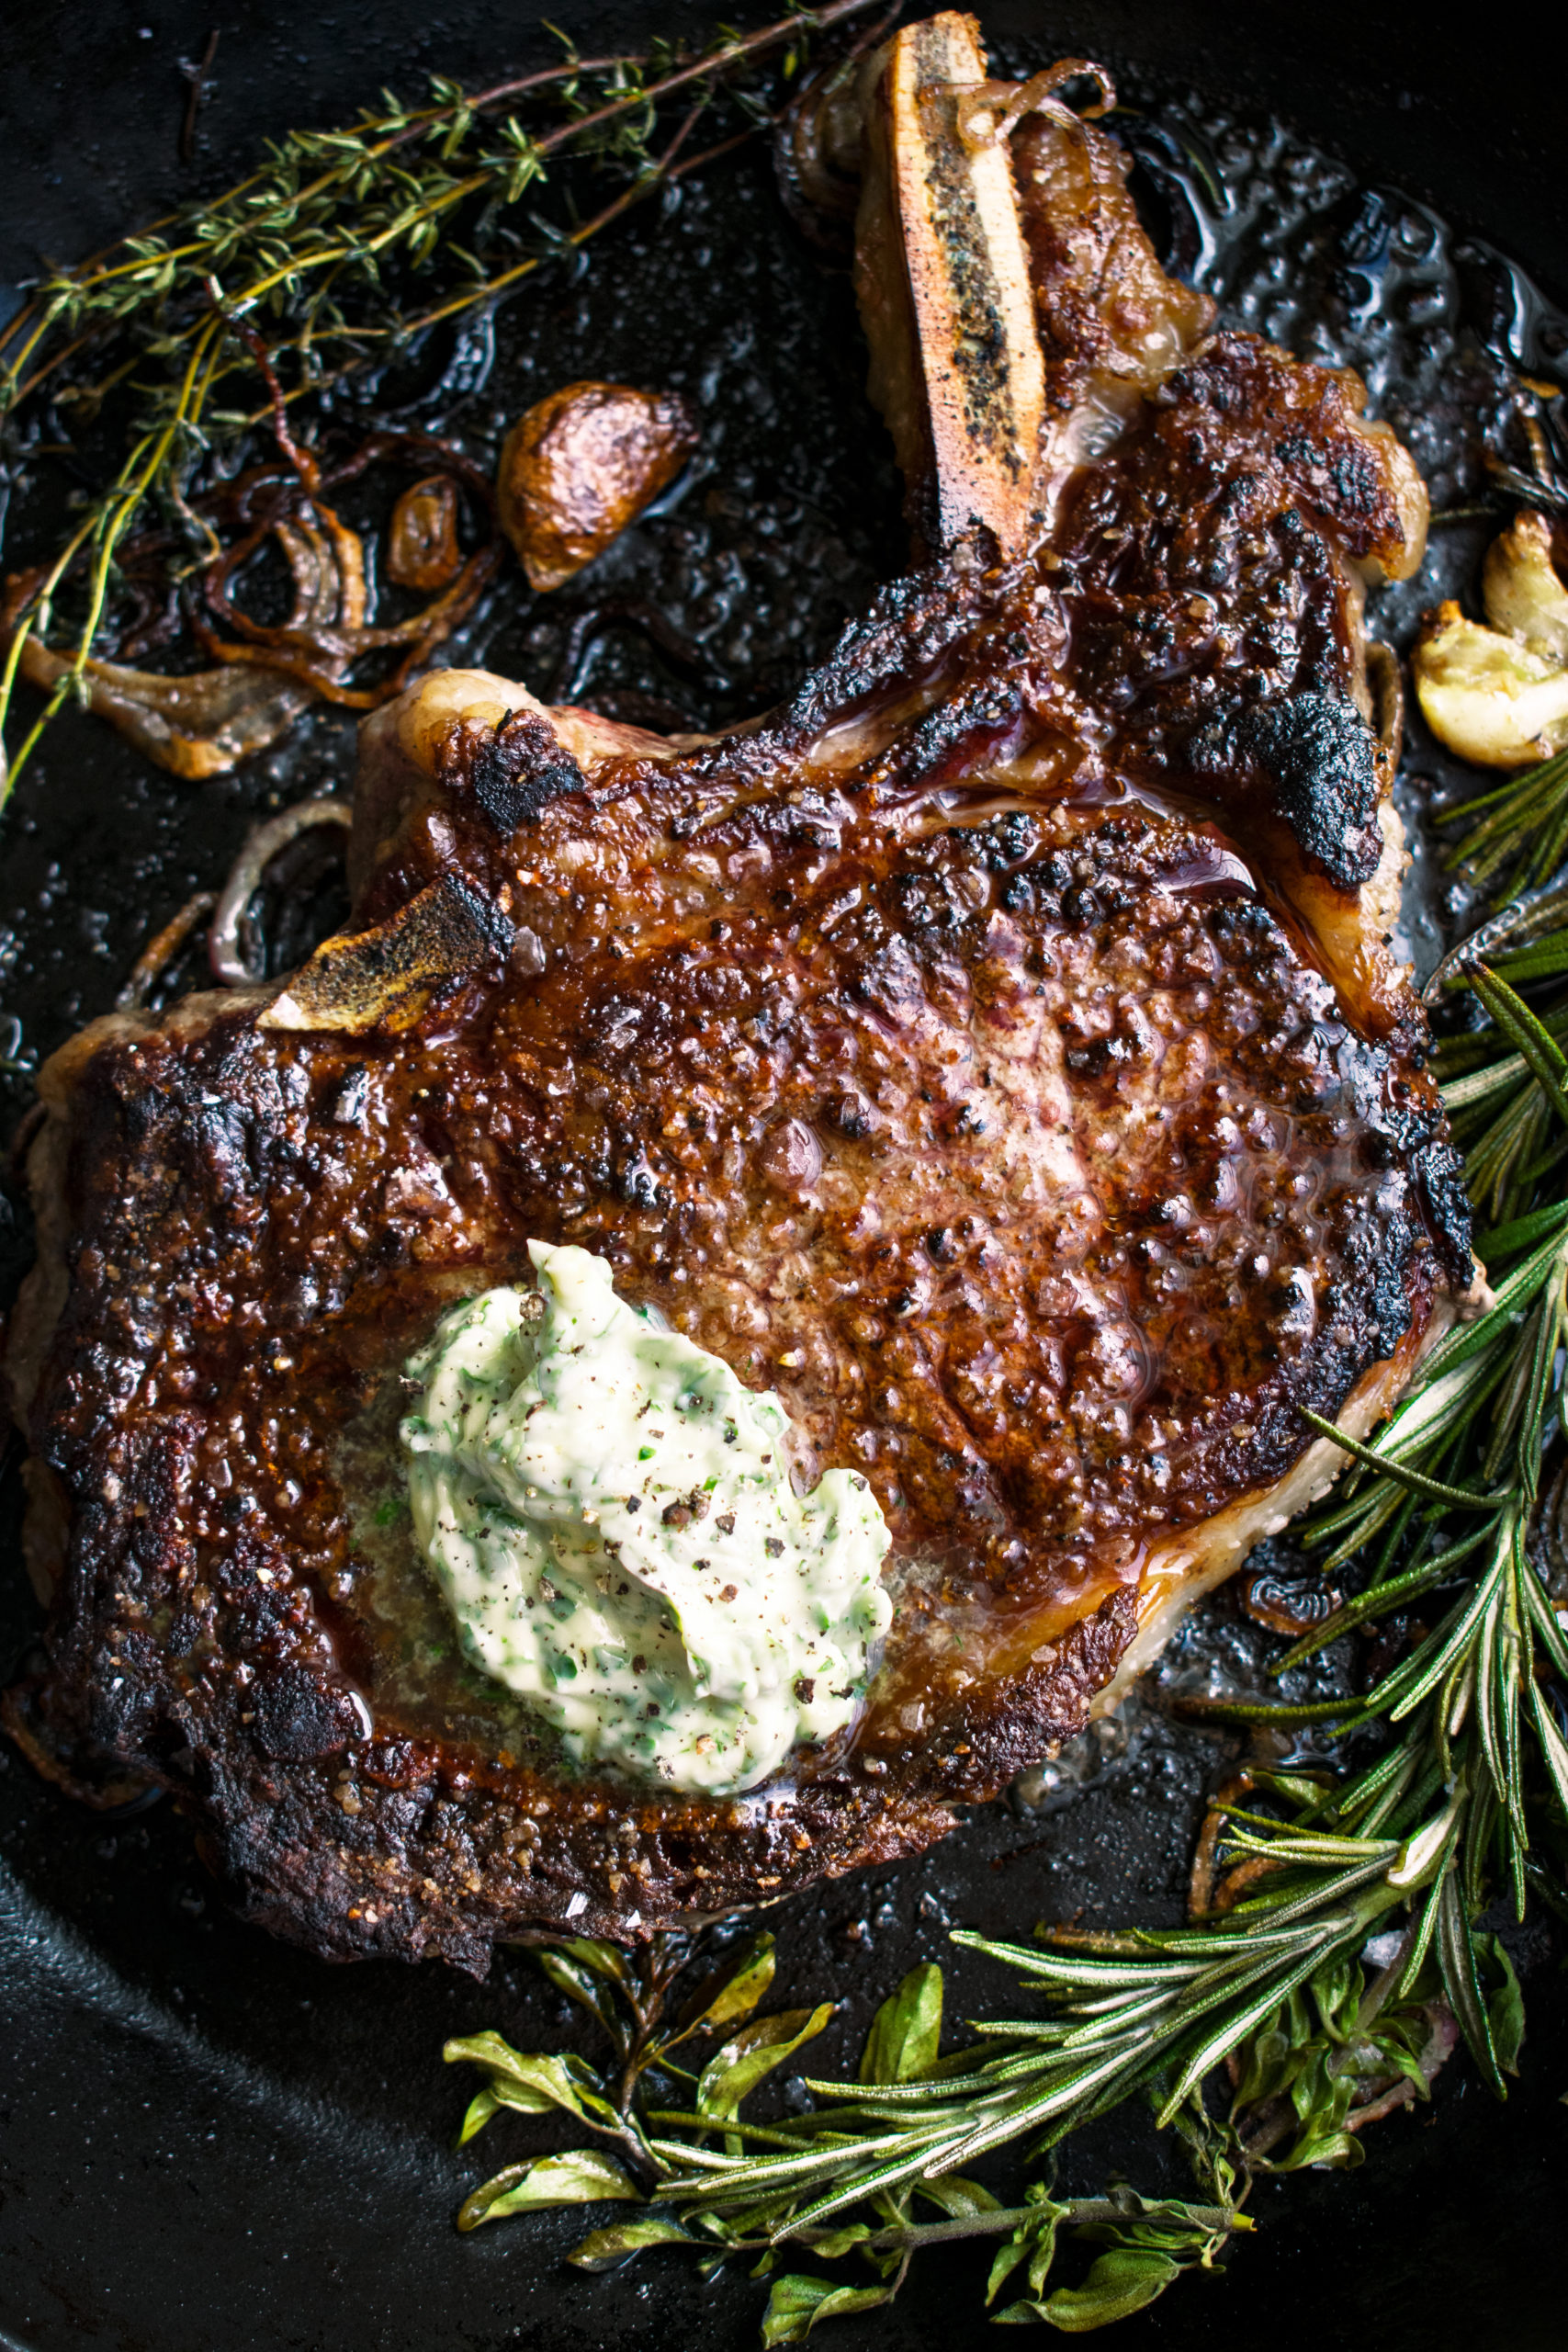 Ribeye Steaks in a Cast Iron Skillet - The Salted Potato from